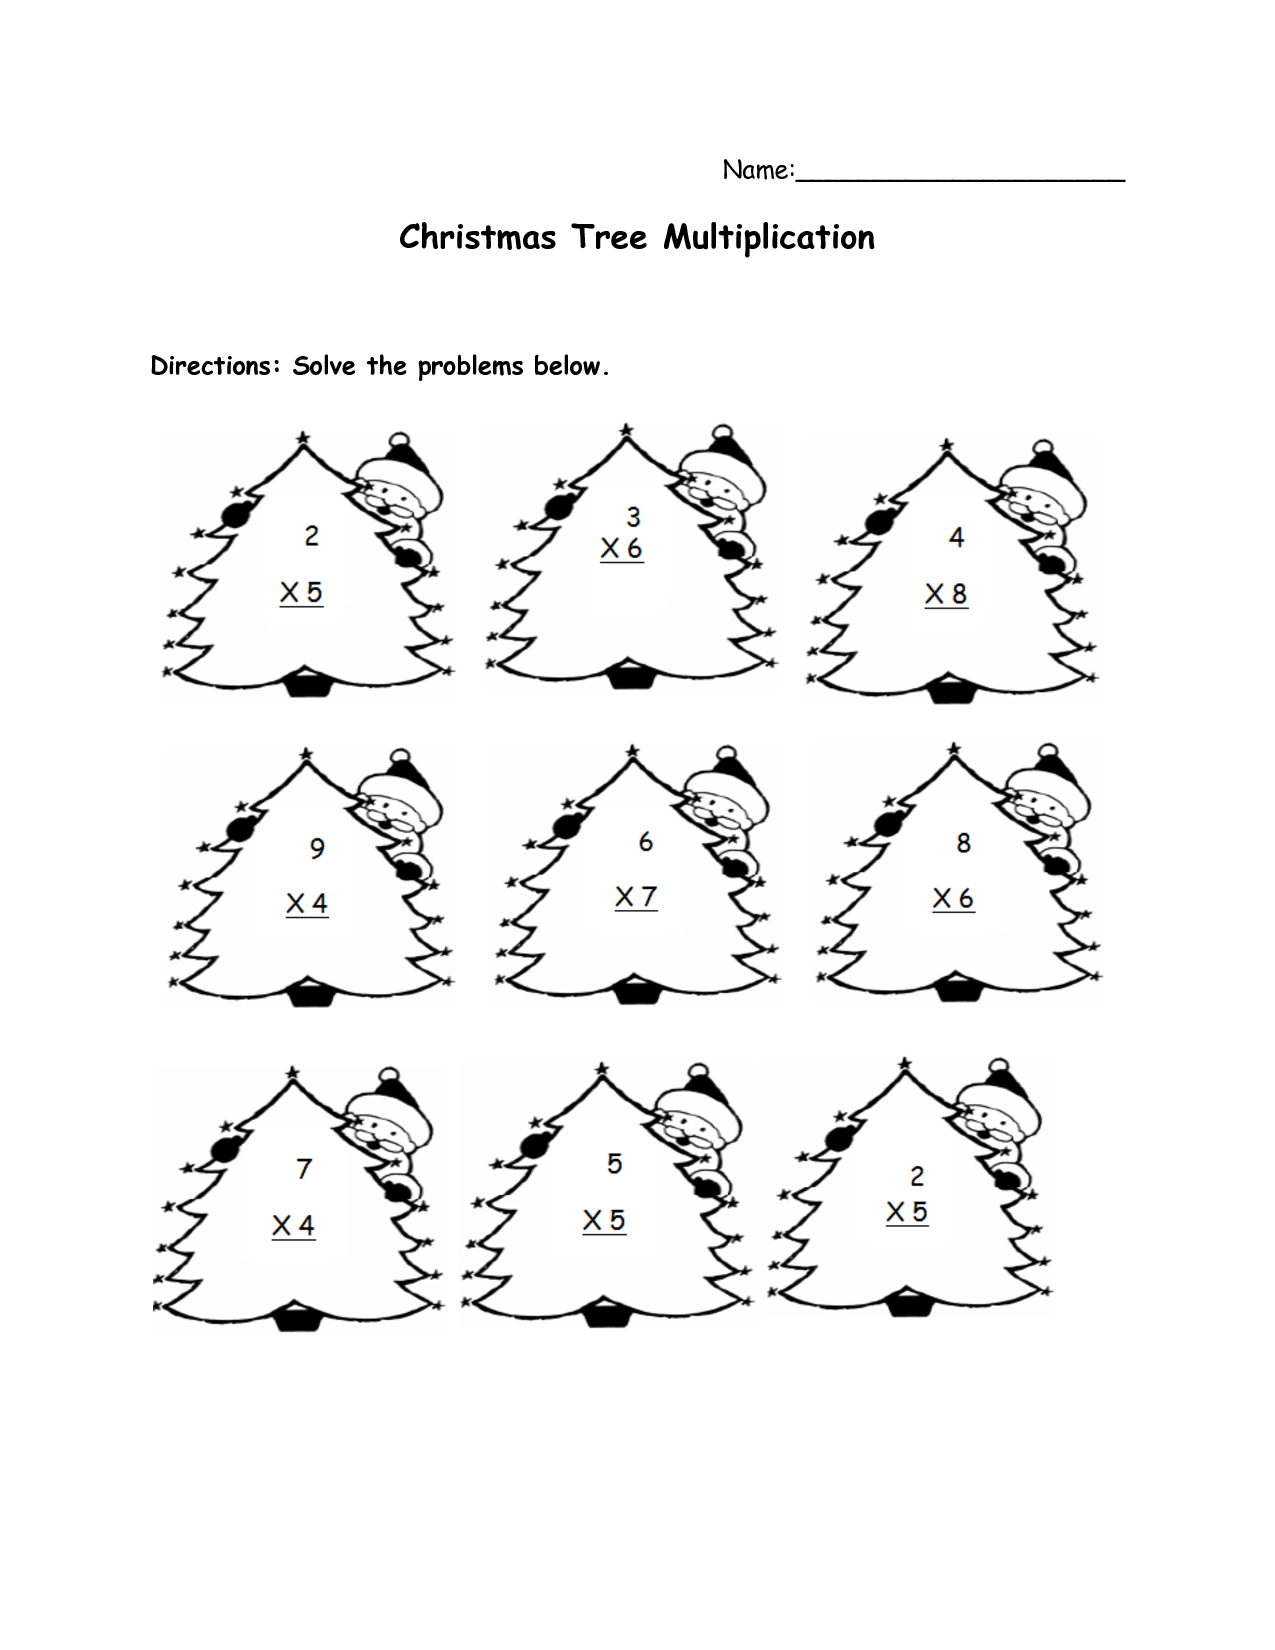 5-best-images-of-simple-page-printable-christmas-math-christmas-tree-coloring-page-preschool